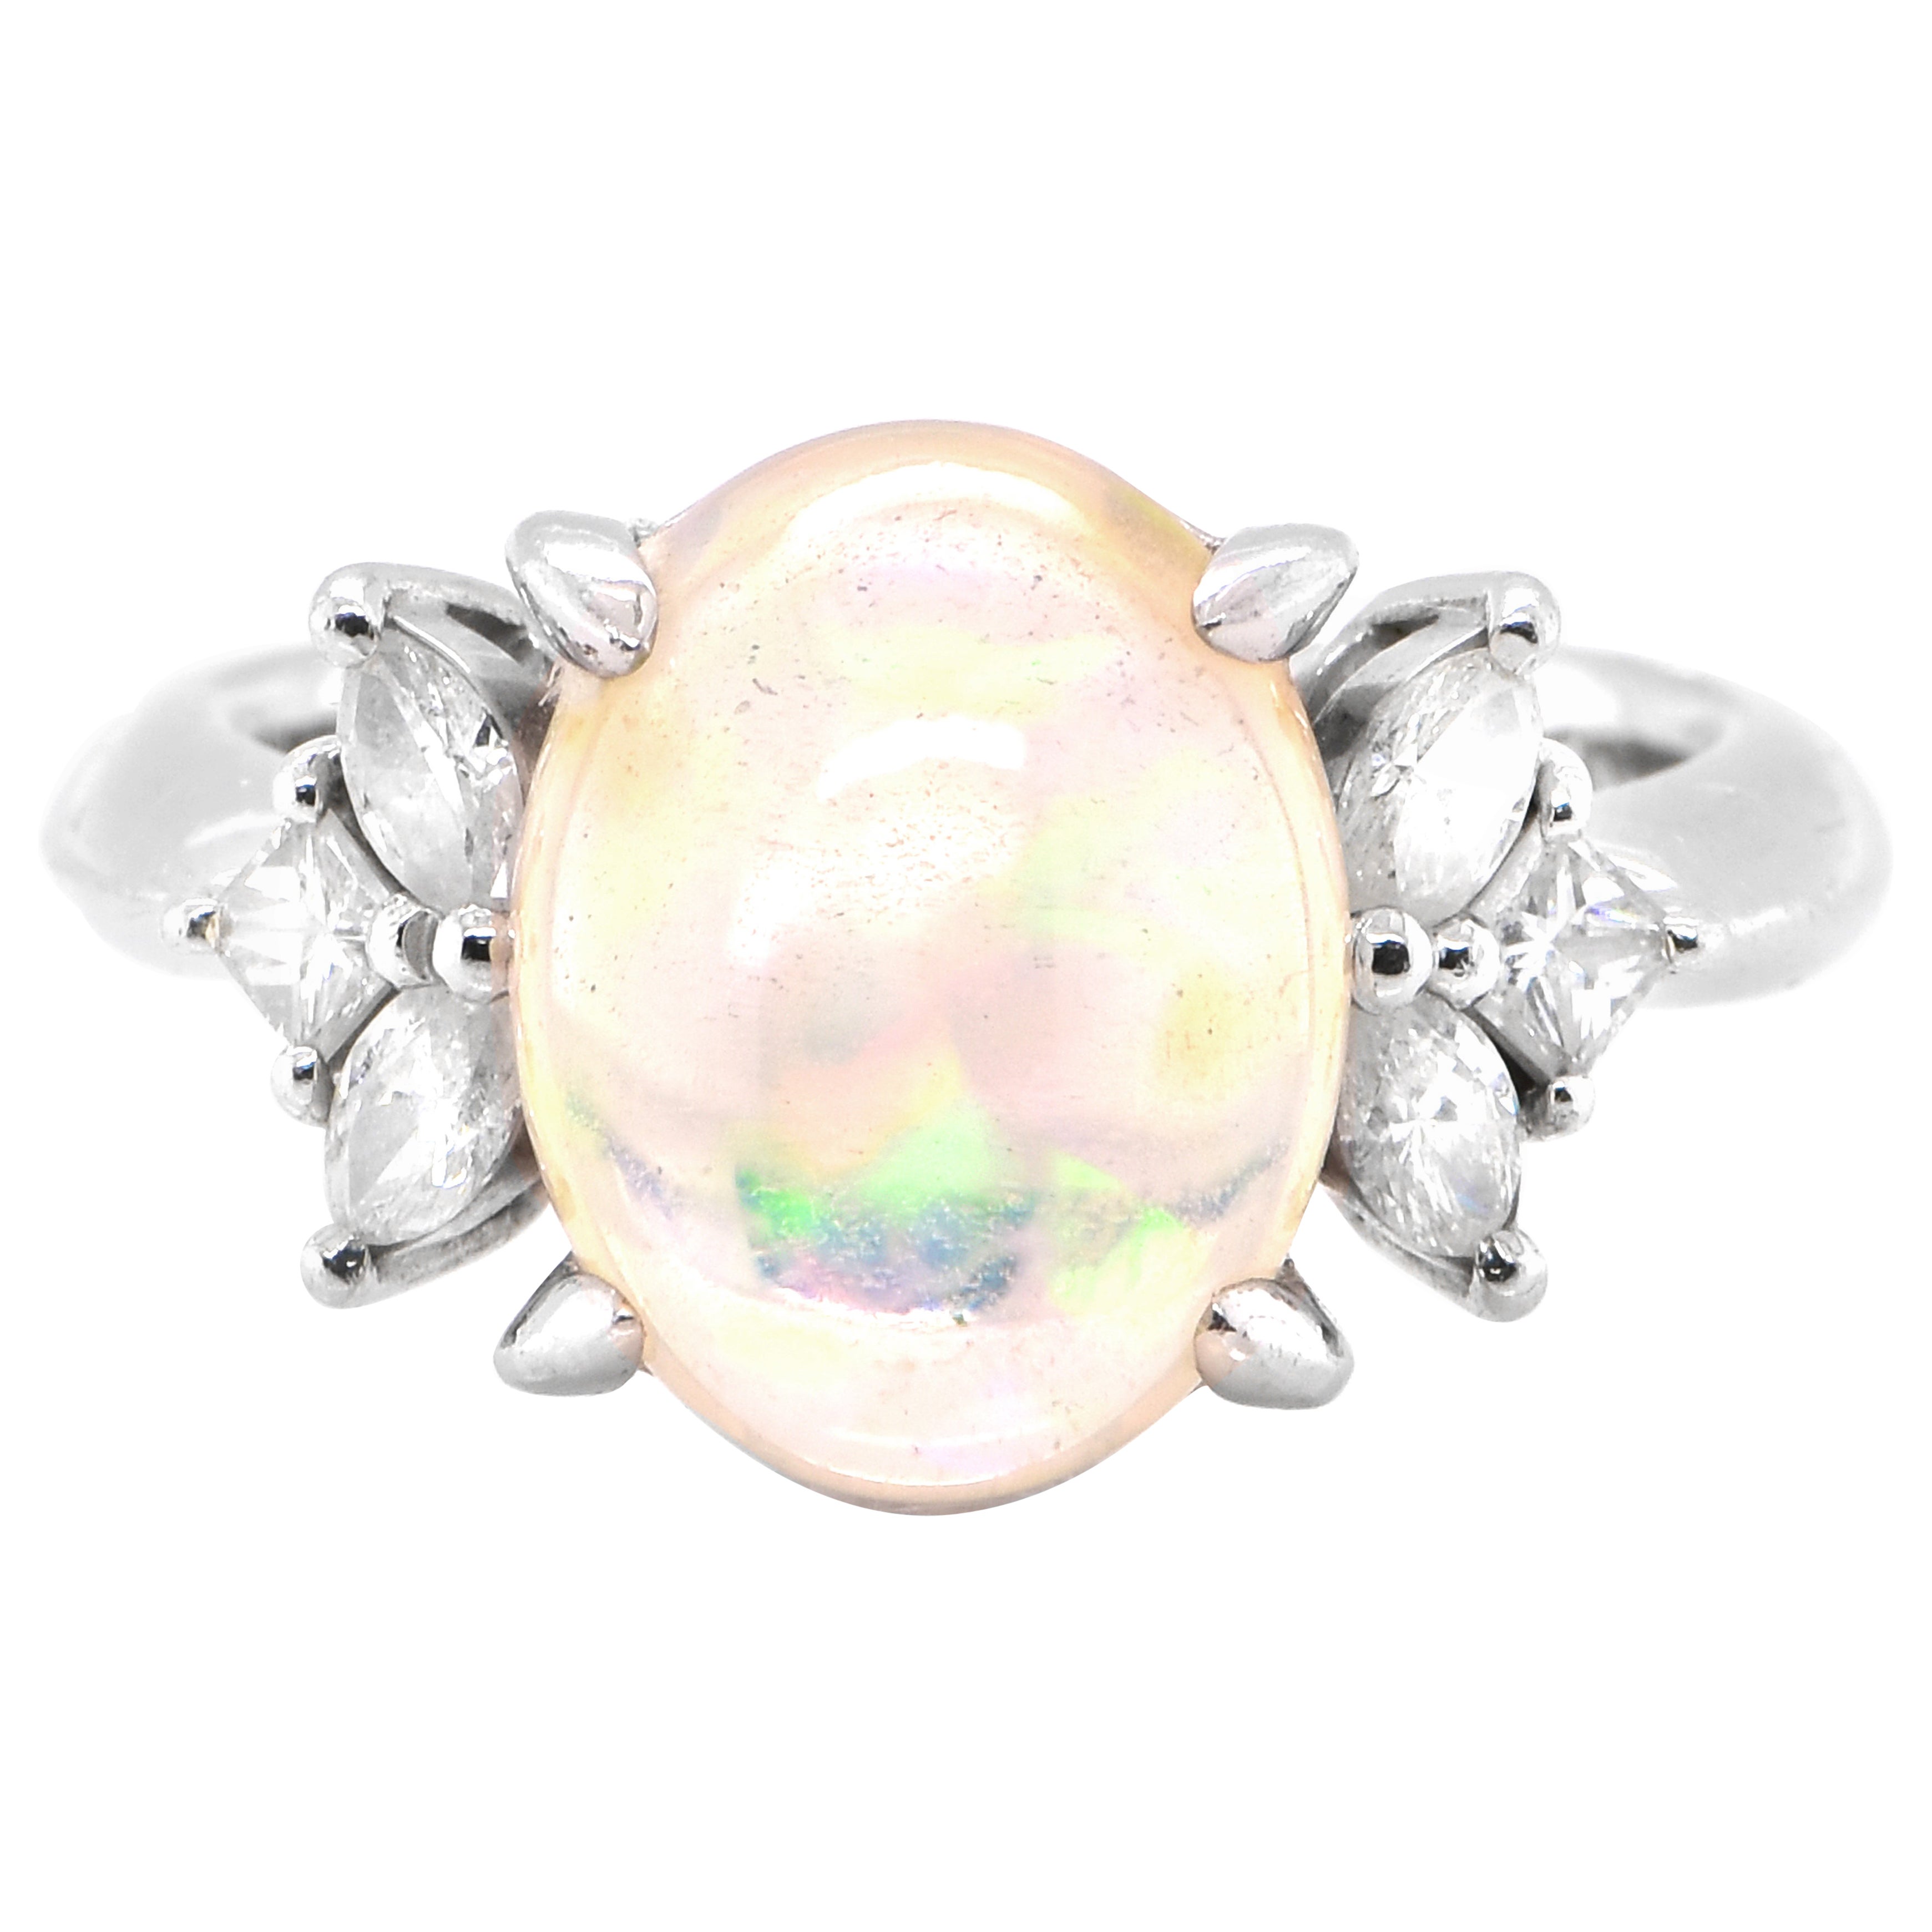 4.17 Carat Natural Water Opal and Diamond Cocktail Ring Set in Platinum